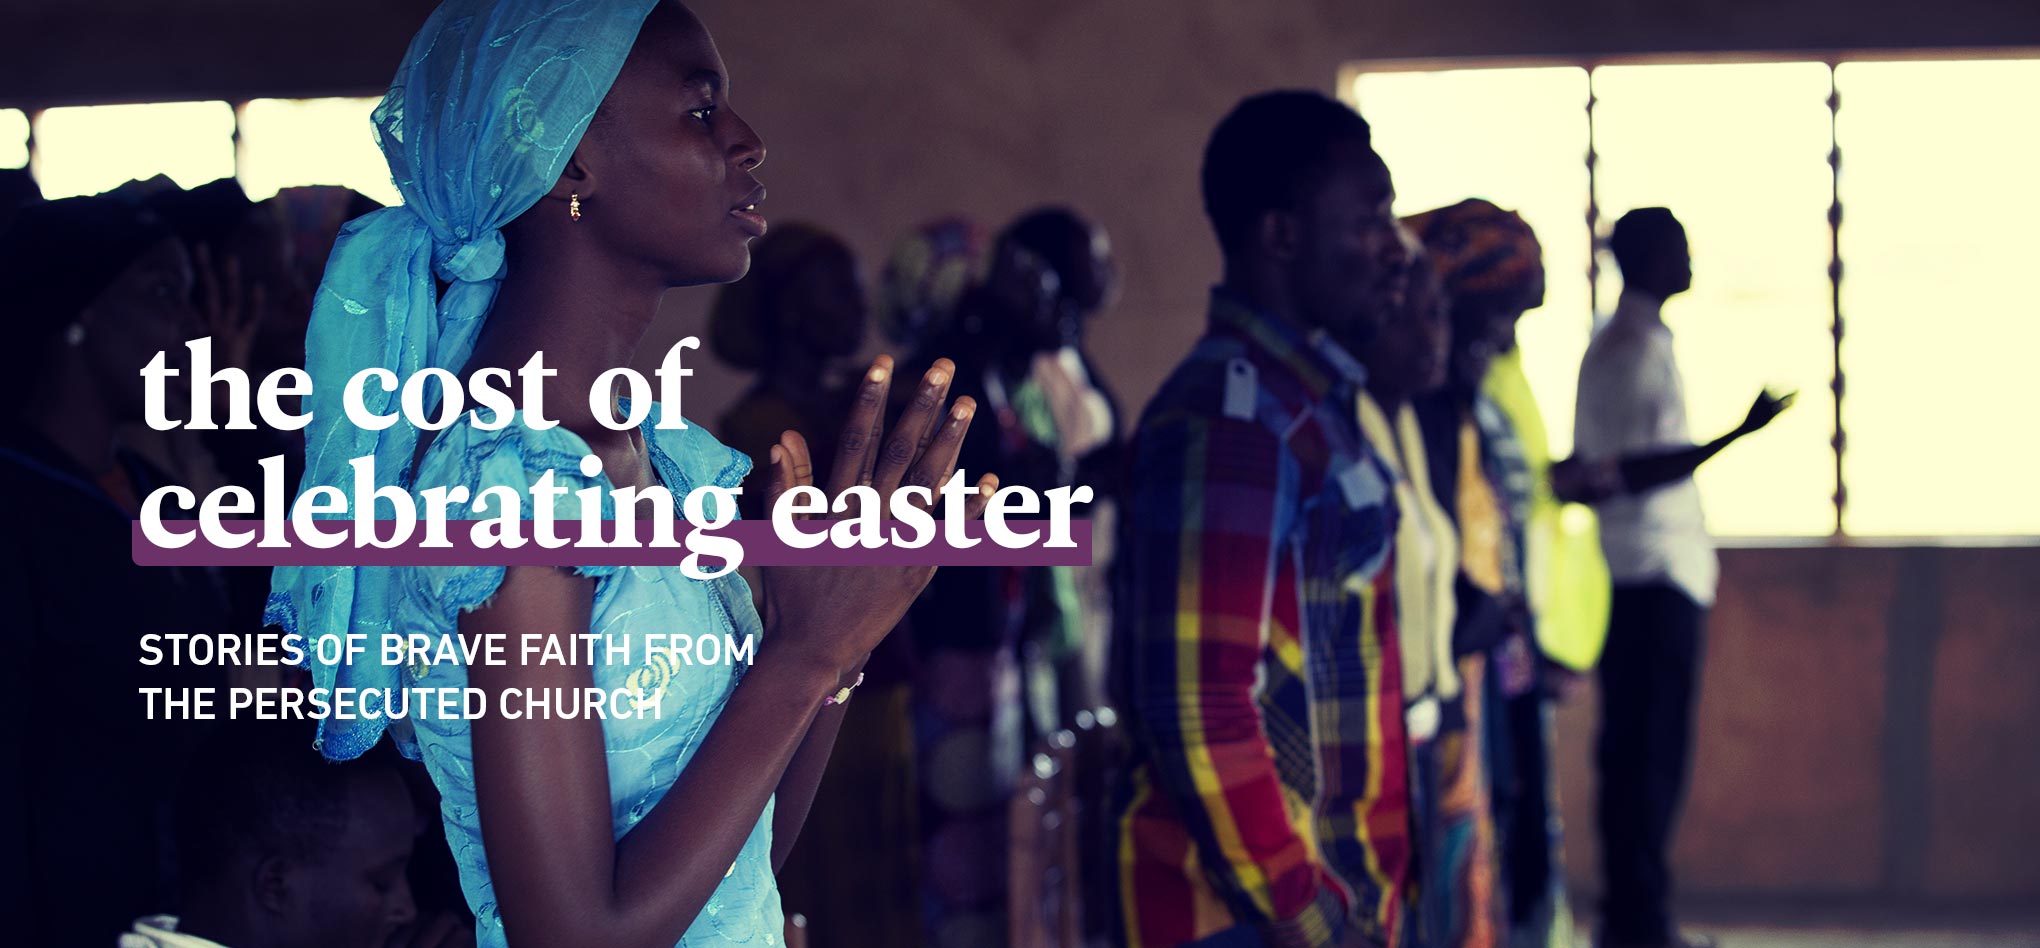 The cost of celebrating Easter